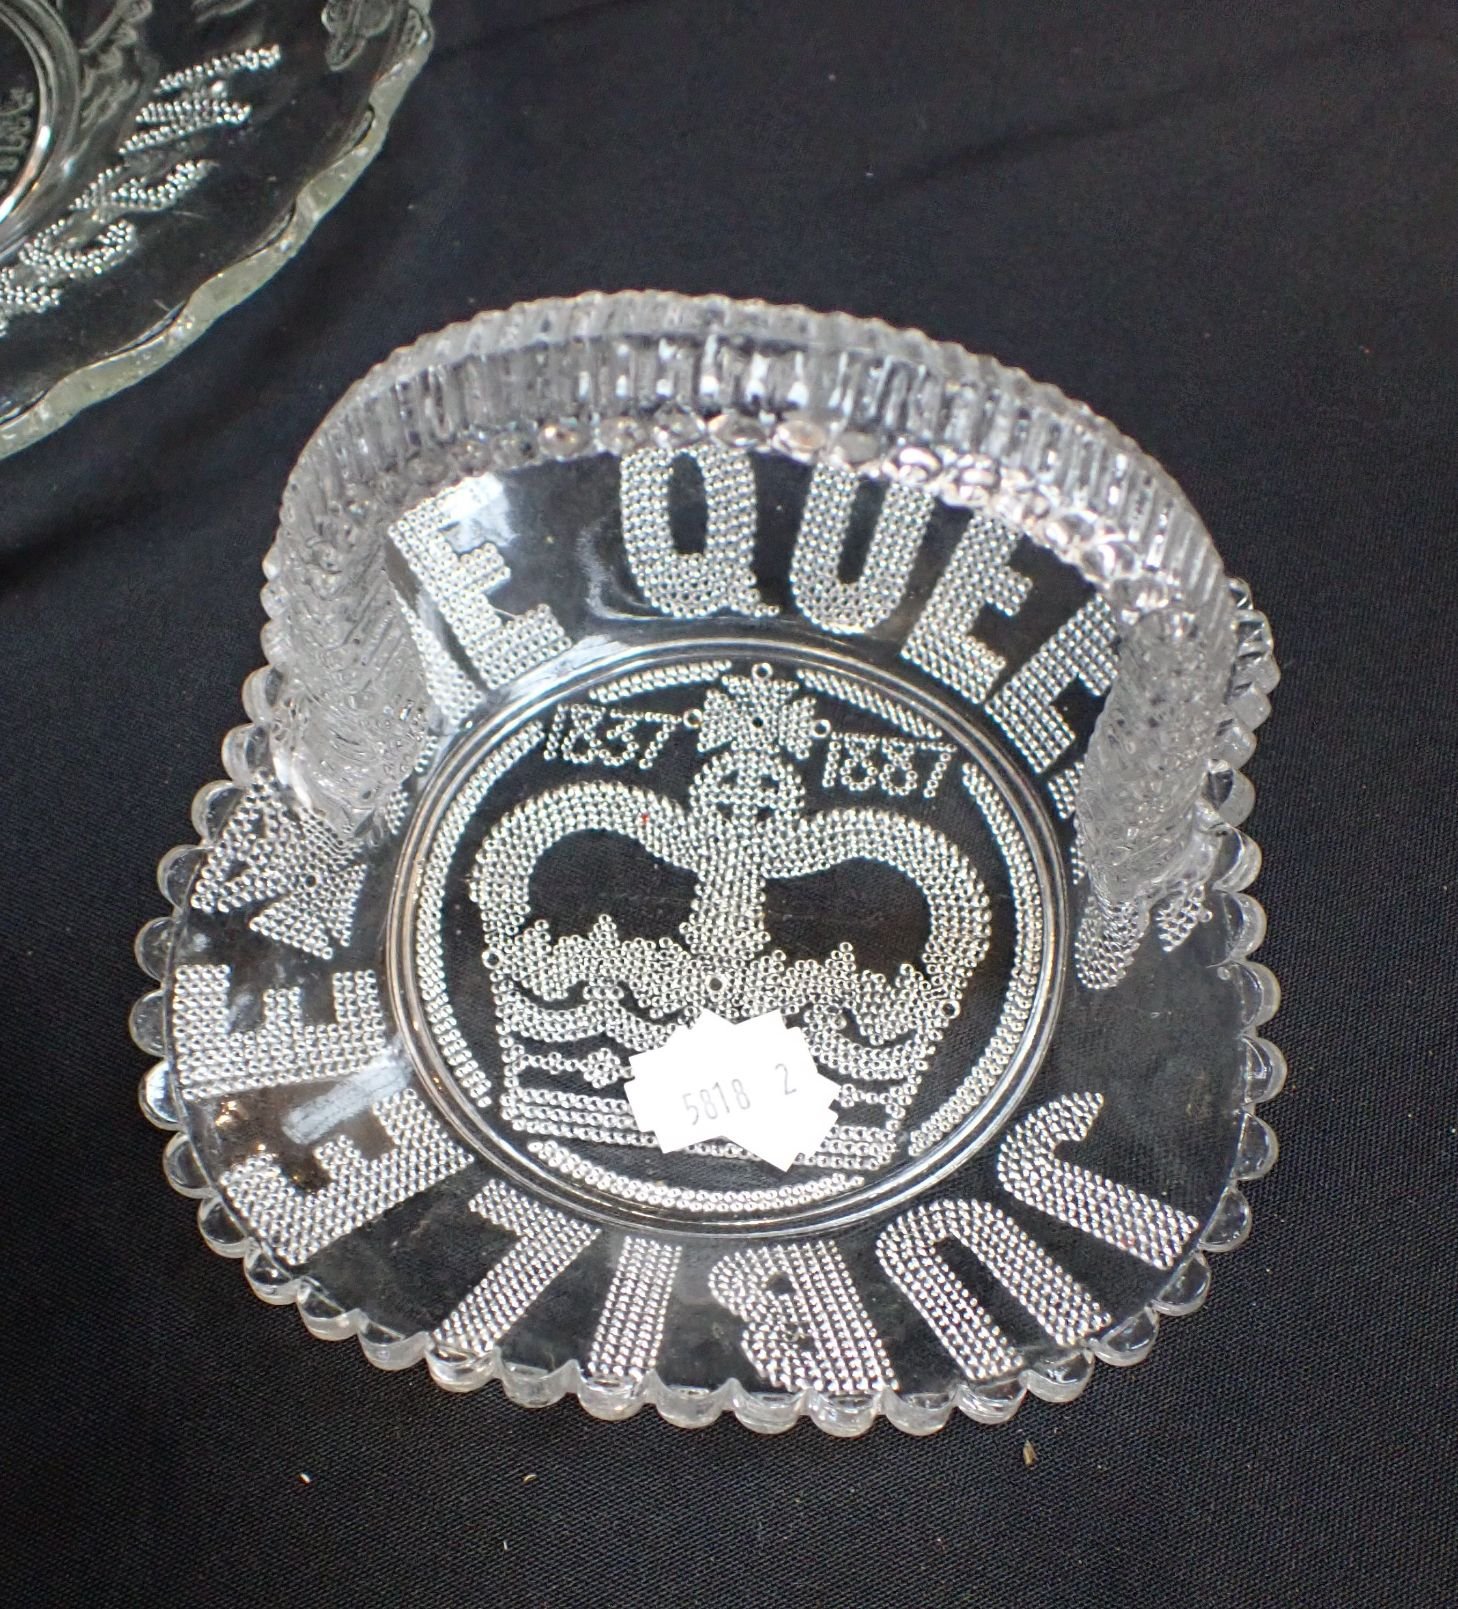 A QUANTITY OF COMMEMORATIVE PRESSED GLASS - Image 6 of 6